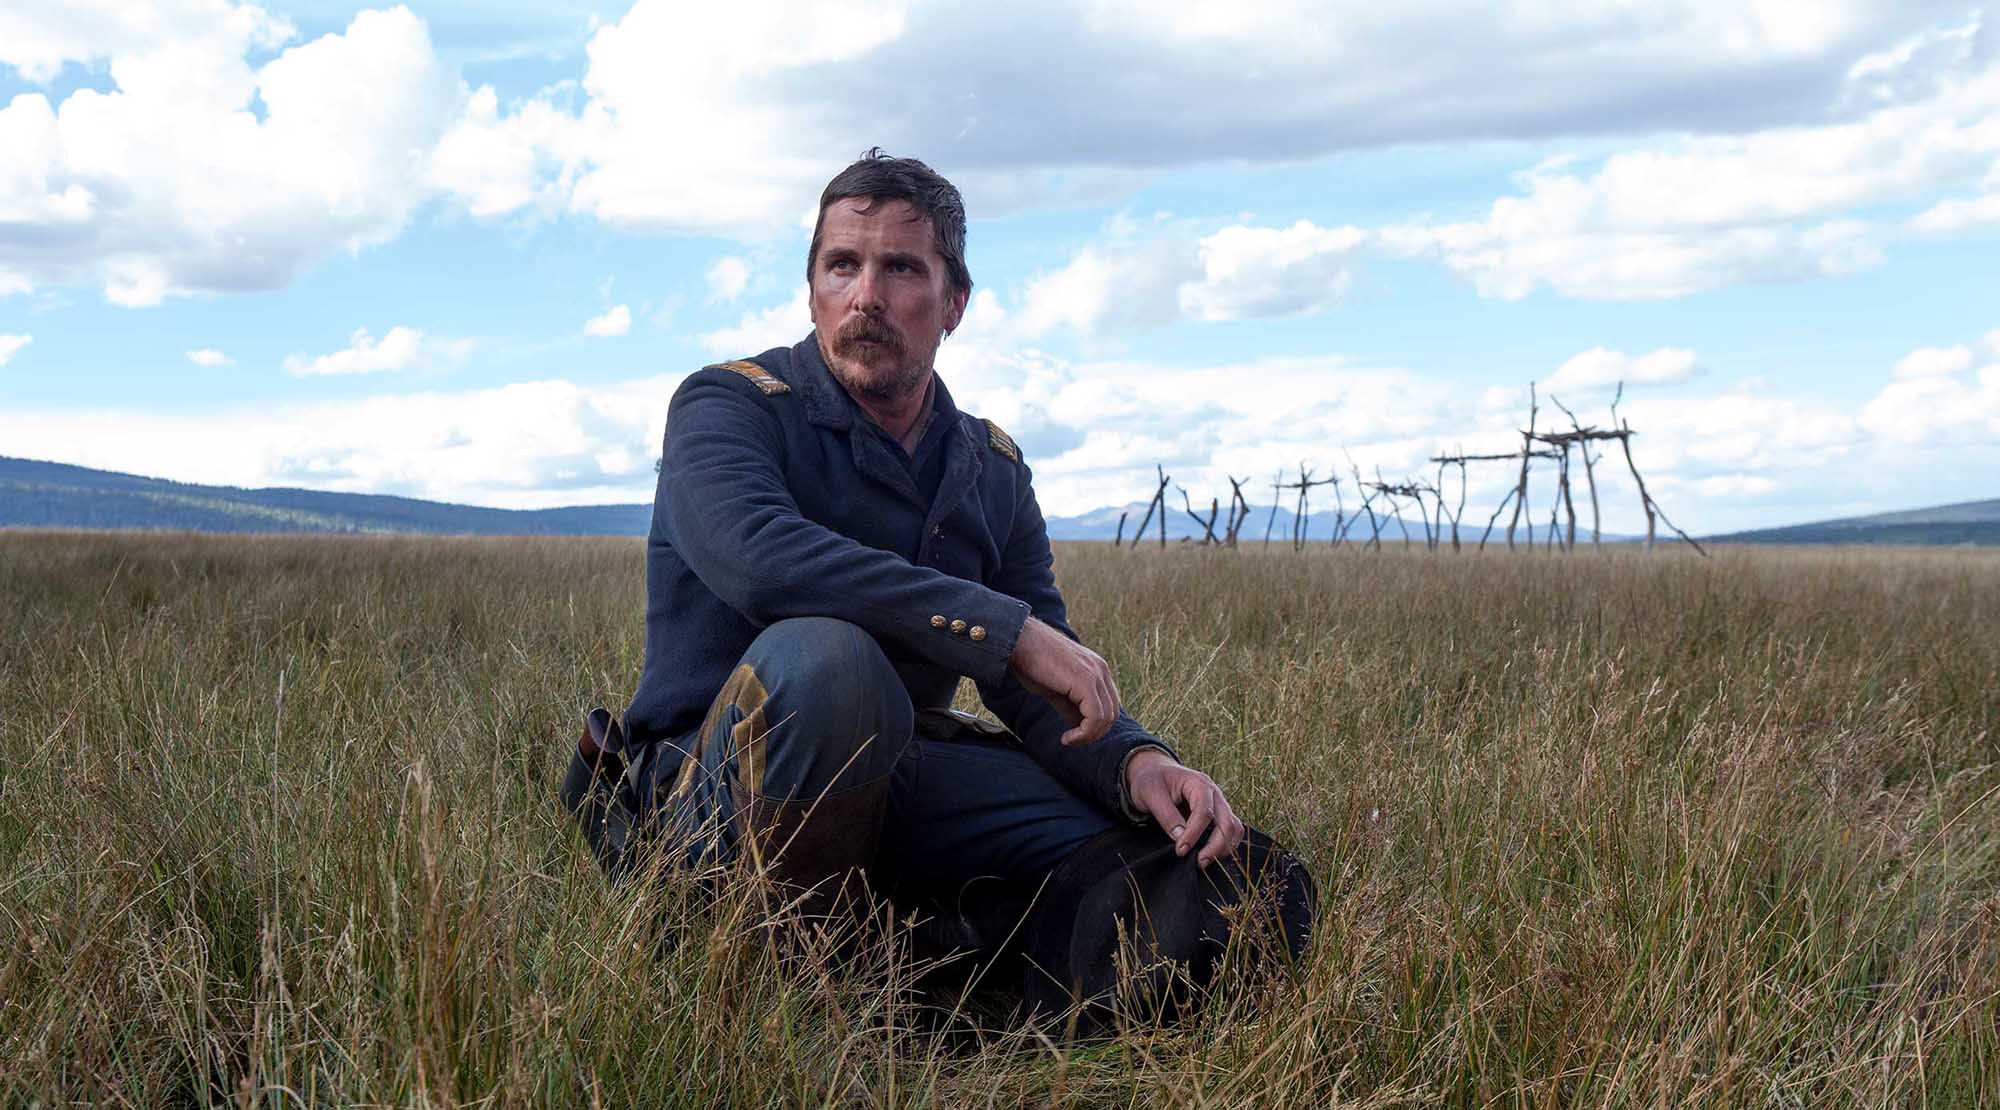 At the box office this weekend: Get caught up with an Army soldier’s colonial conflict in ‘Hostiles’; bag some loot with a man who’s definitely not going to ‘Have a Nice Day’; and discover the healing power of music in ‘American Folk’.